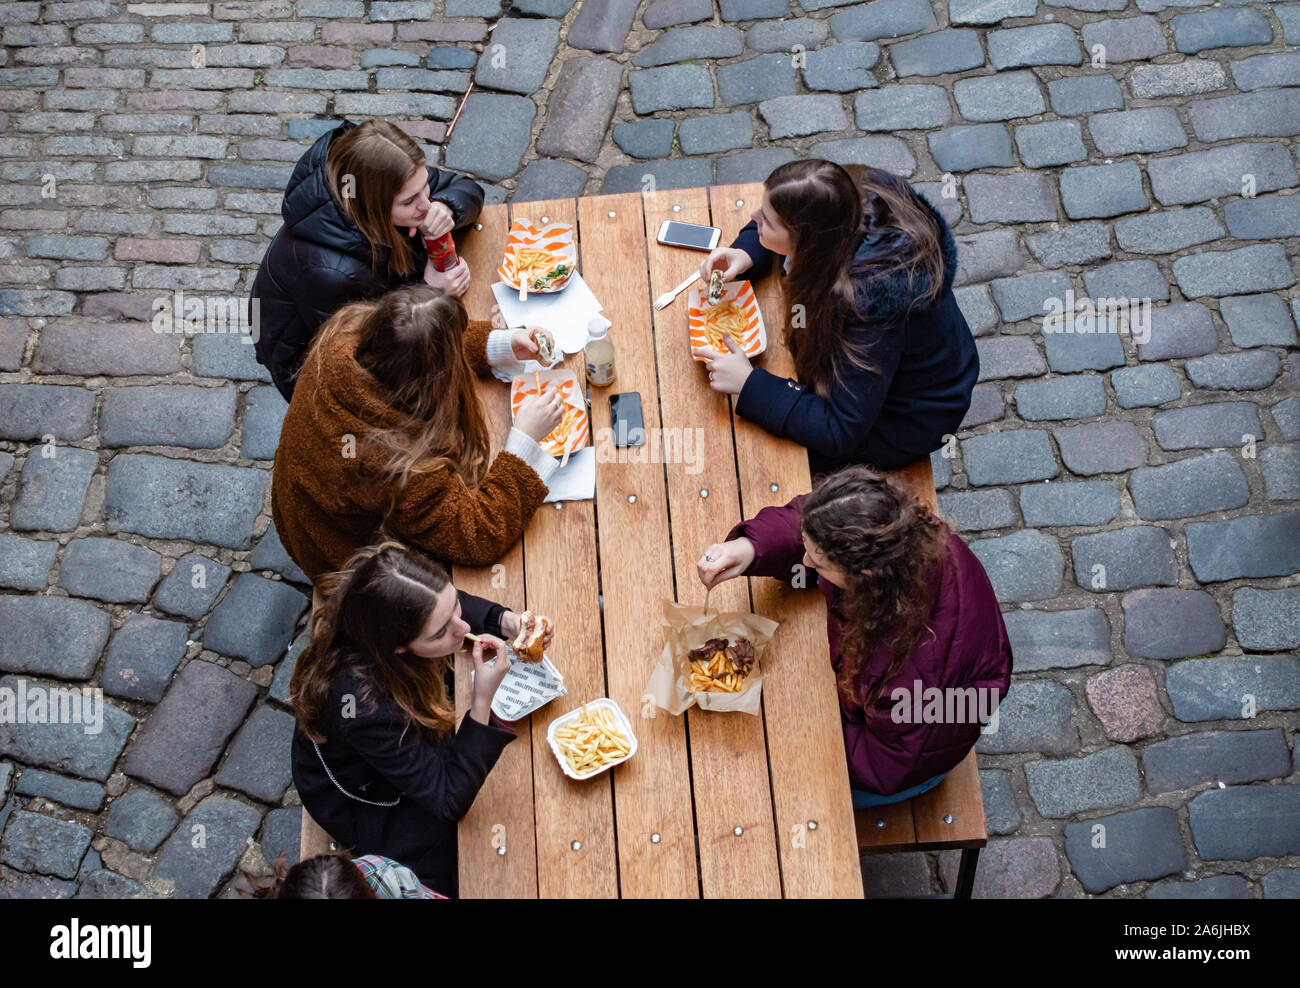 birds eye view of people eating food at a table Stock Photo